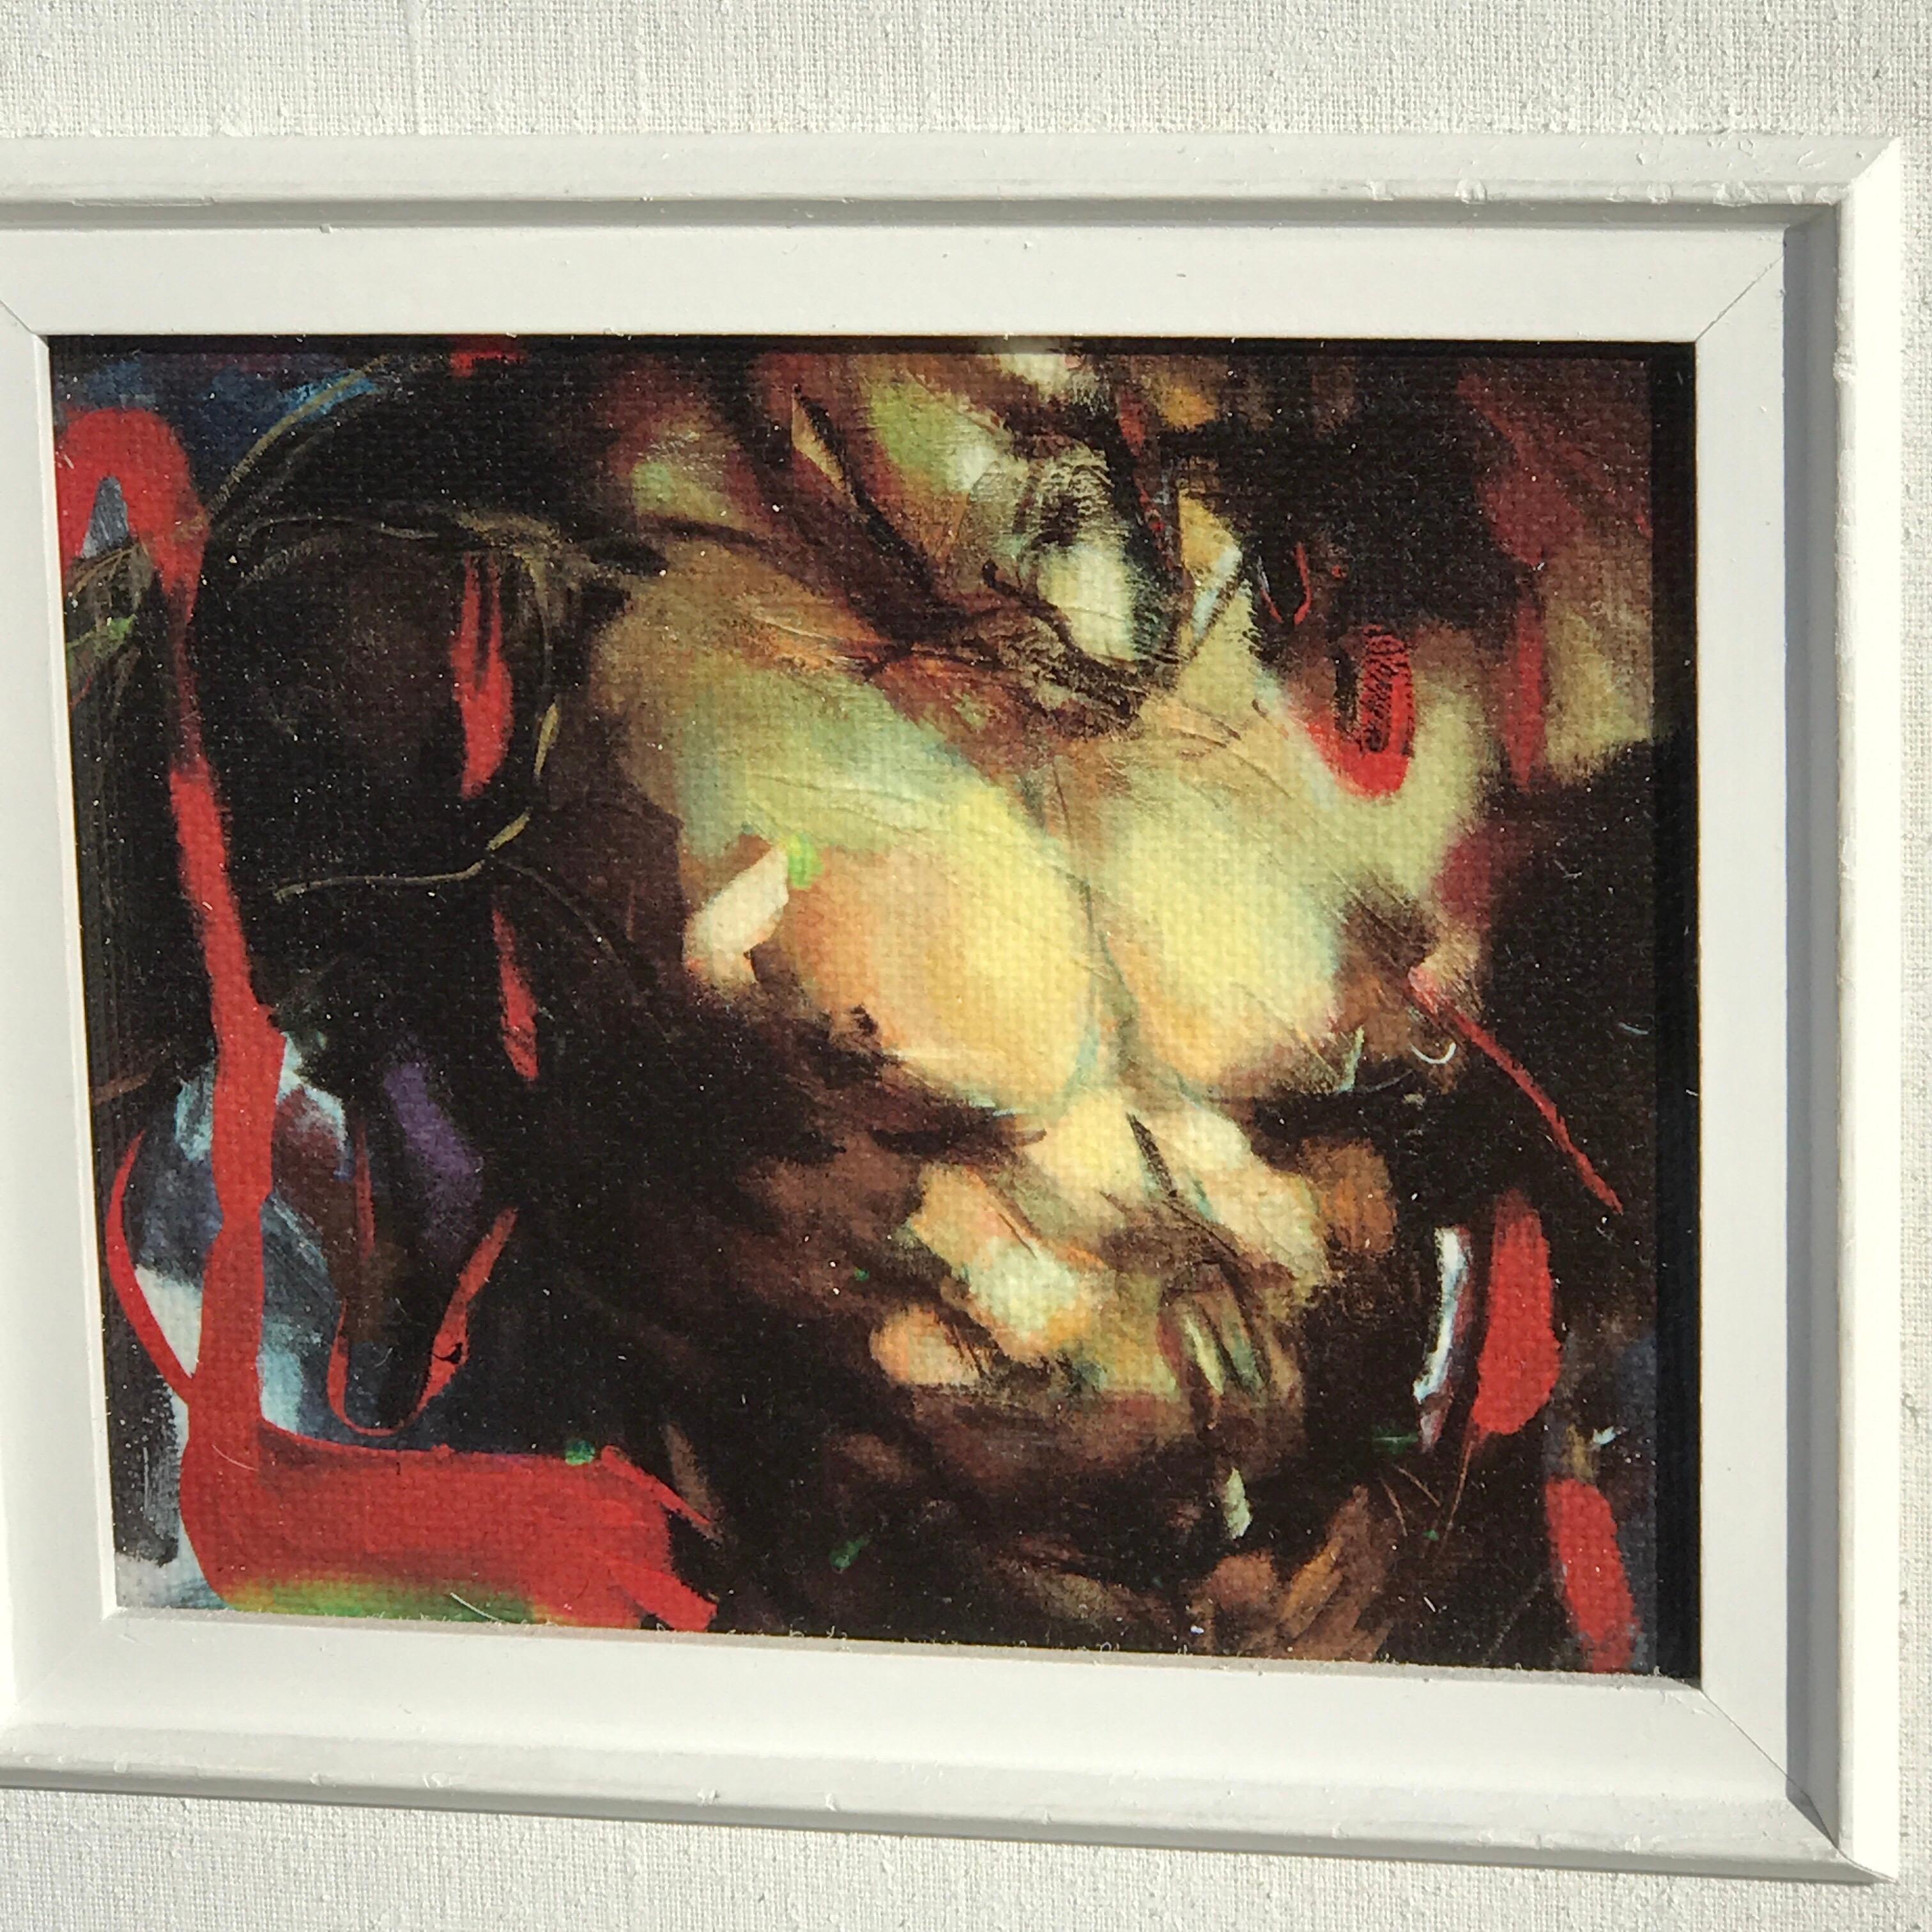 Contemporary Two Diminutive Giclee Male Nude Studies by Johanne Corno For Sale